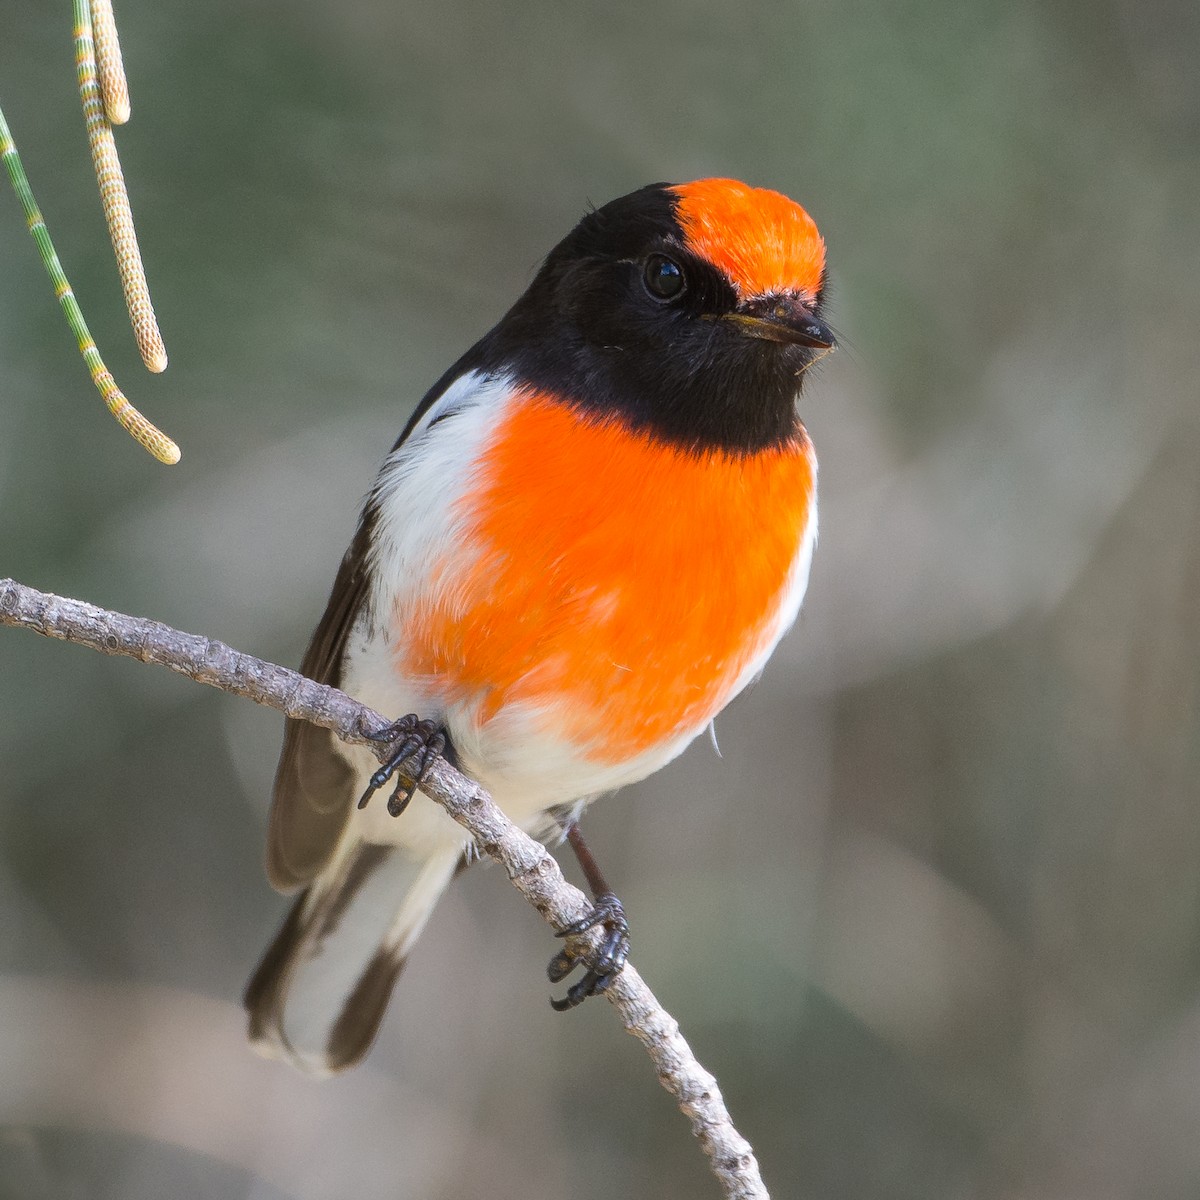 Red-capped Robin - Christine  Chester